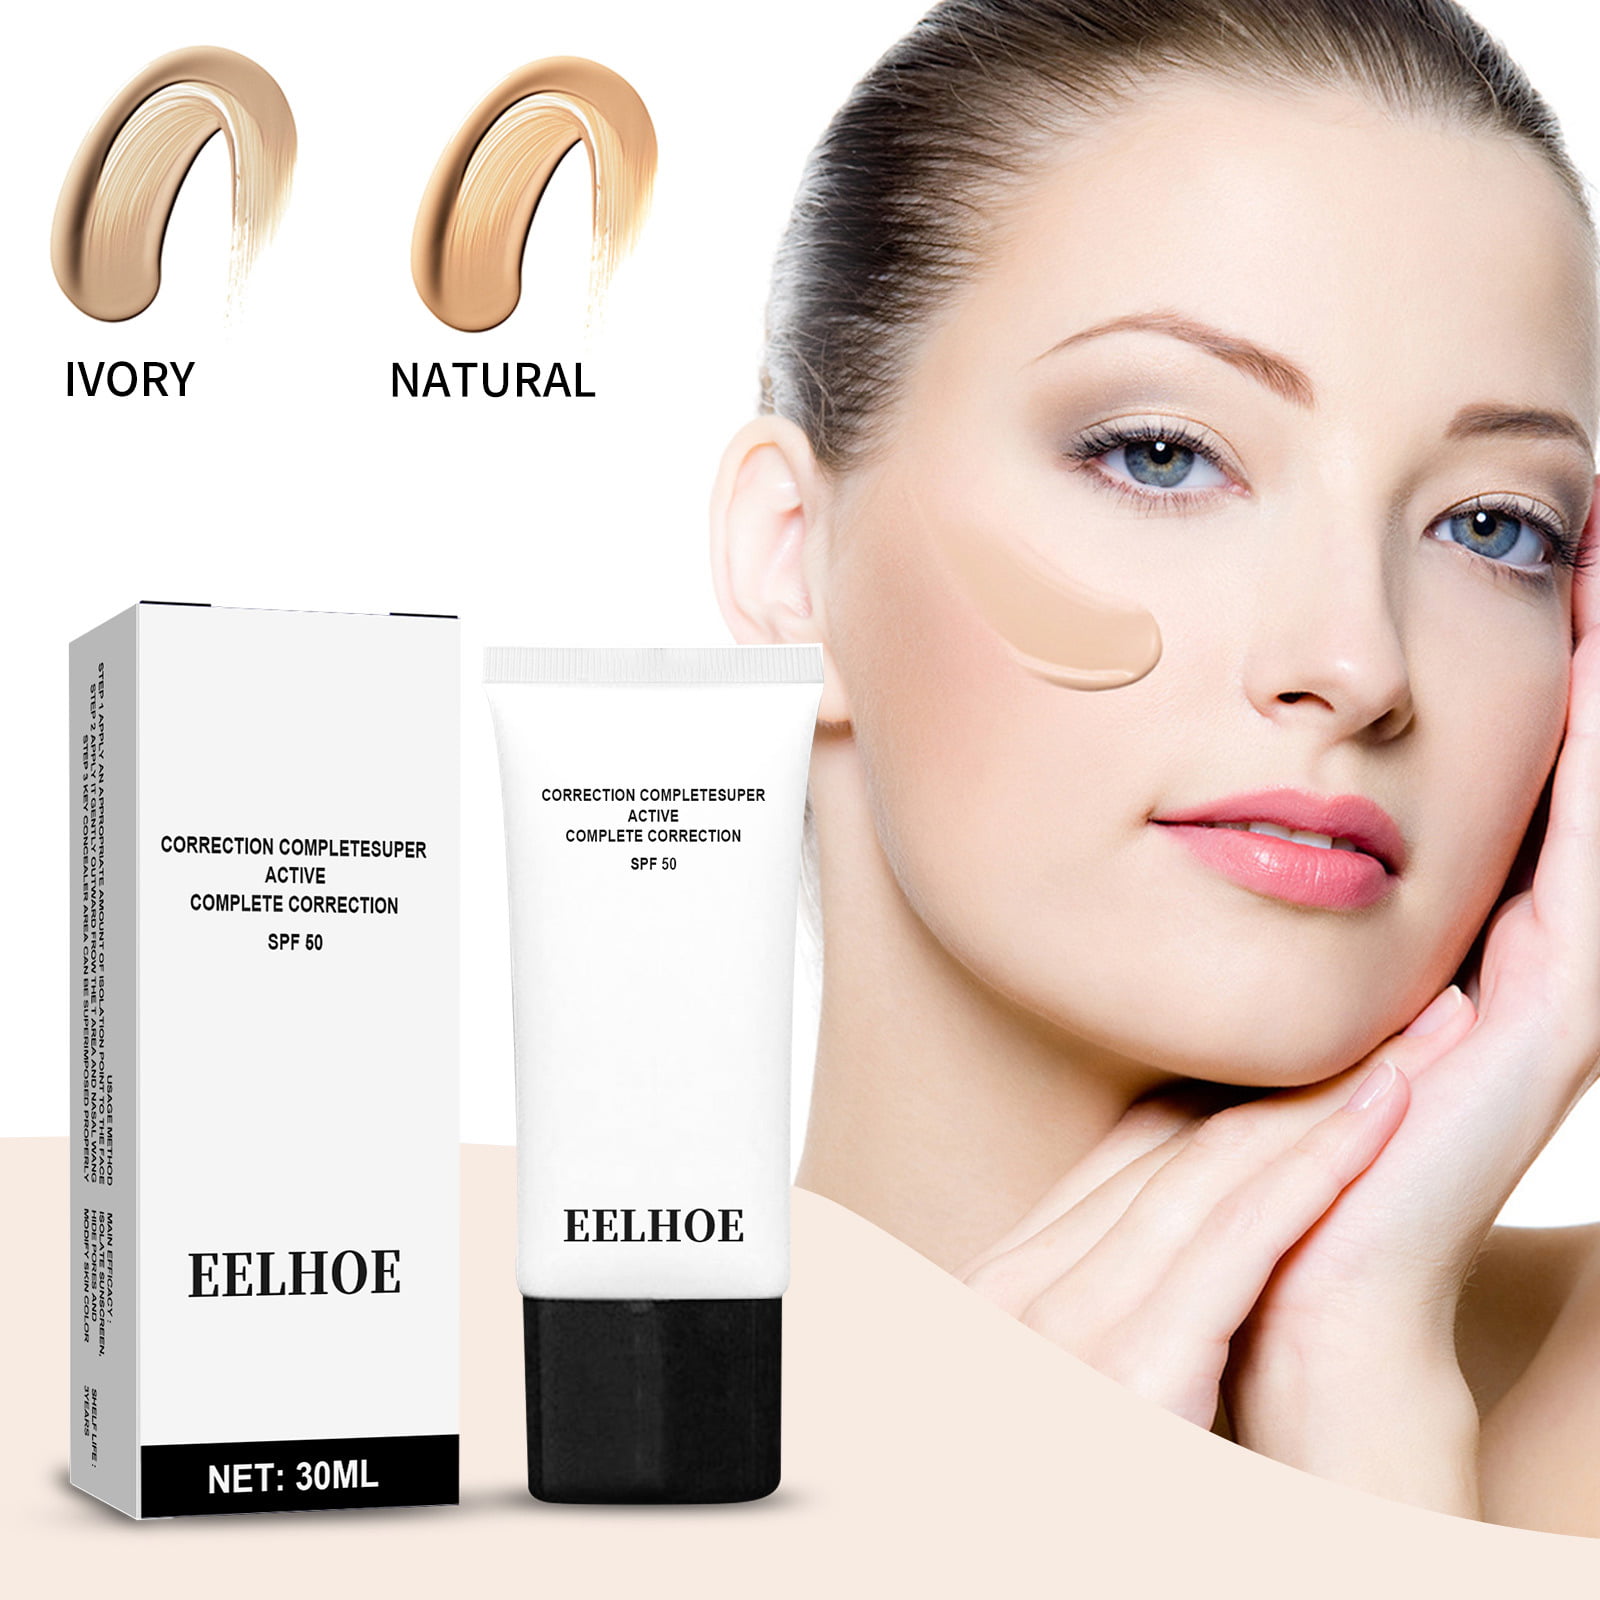 BSMAX Skin Tone Adjusting CC Cream SPF 50,Cosmetics CC Cream, Colour  Correcting Self Adjusting for Mature Skin,All-In-One Face Sunscreen and